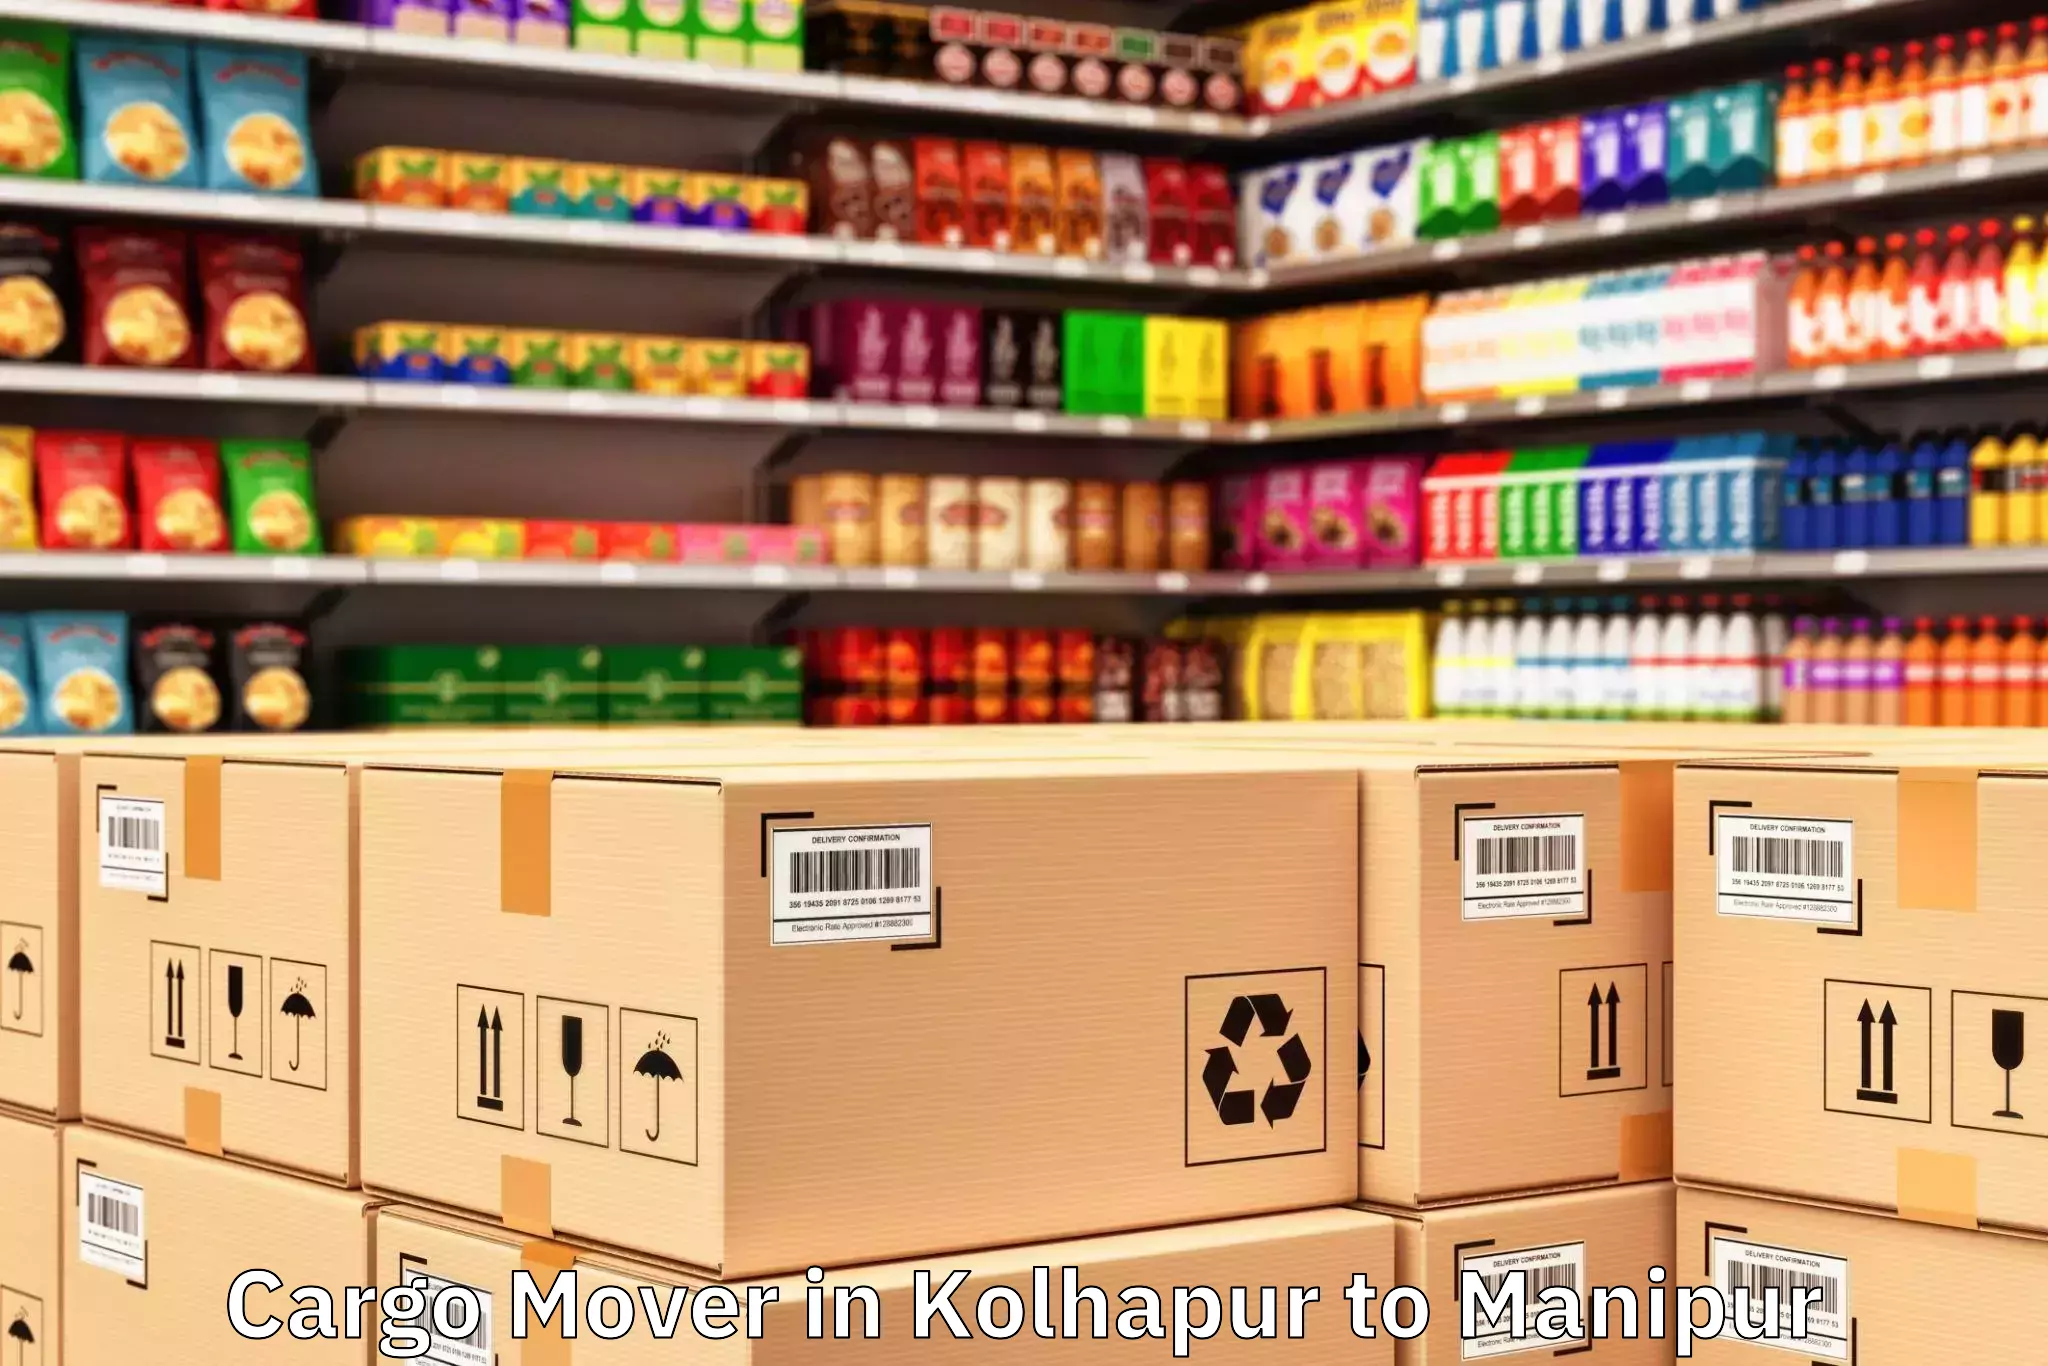 Reliable Kolhapur to Manipur Cargo Mover